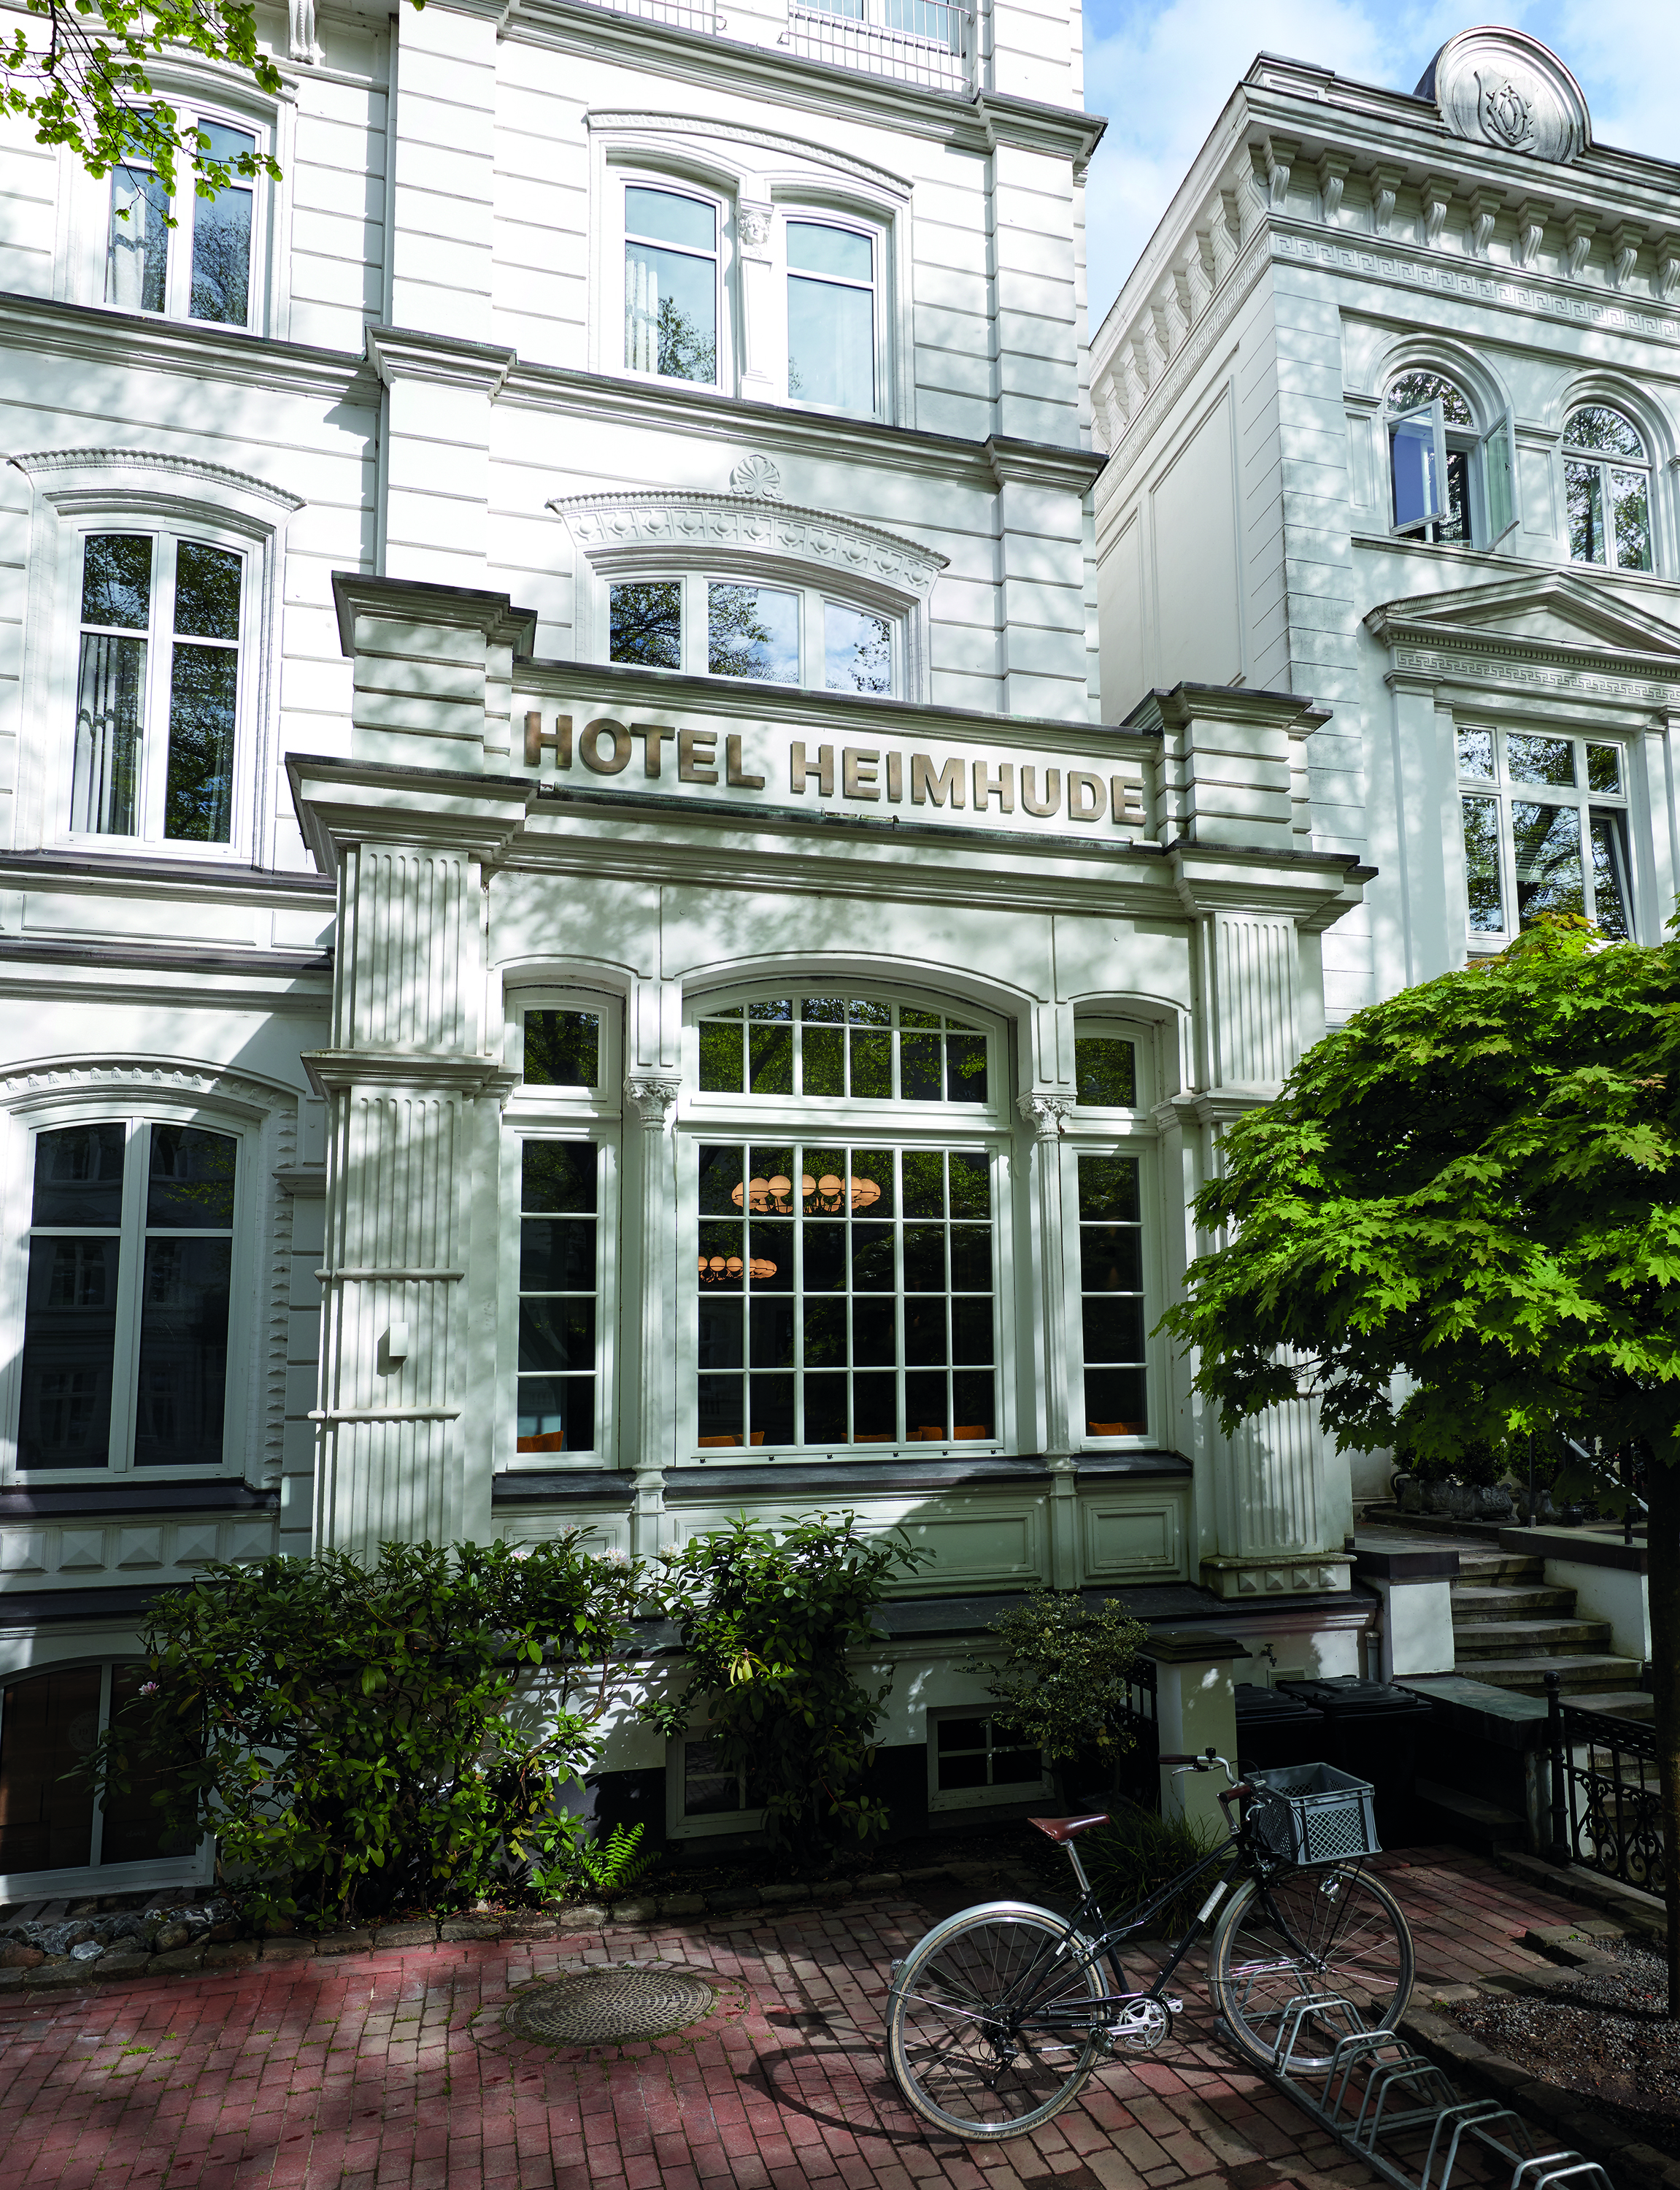 Located on Heimhuder Straße in Hamburg, guests can stay with the designs.